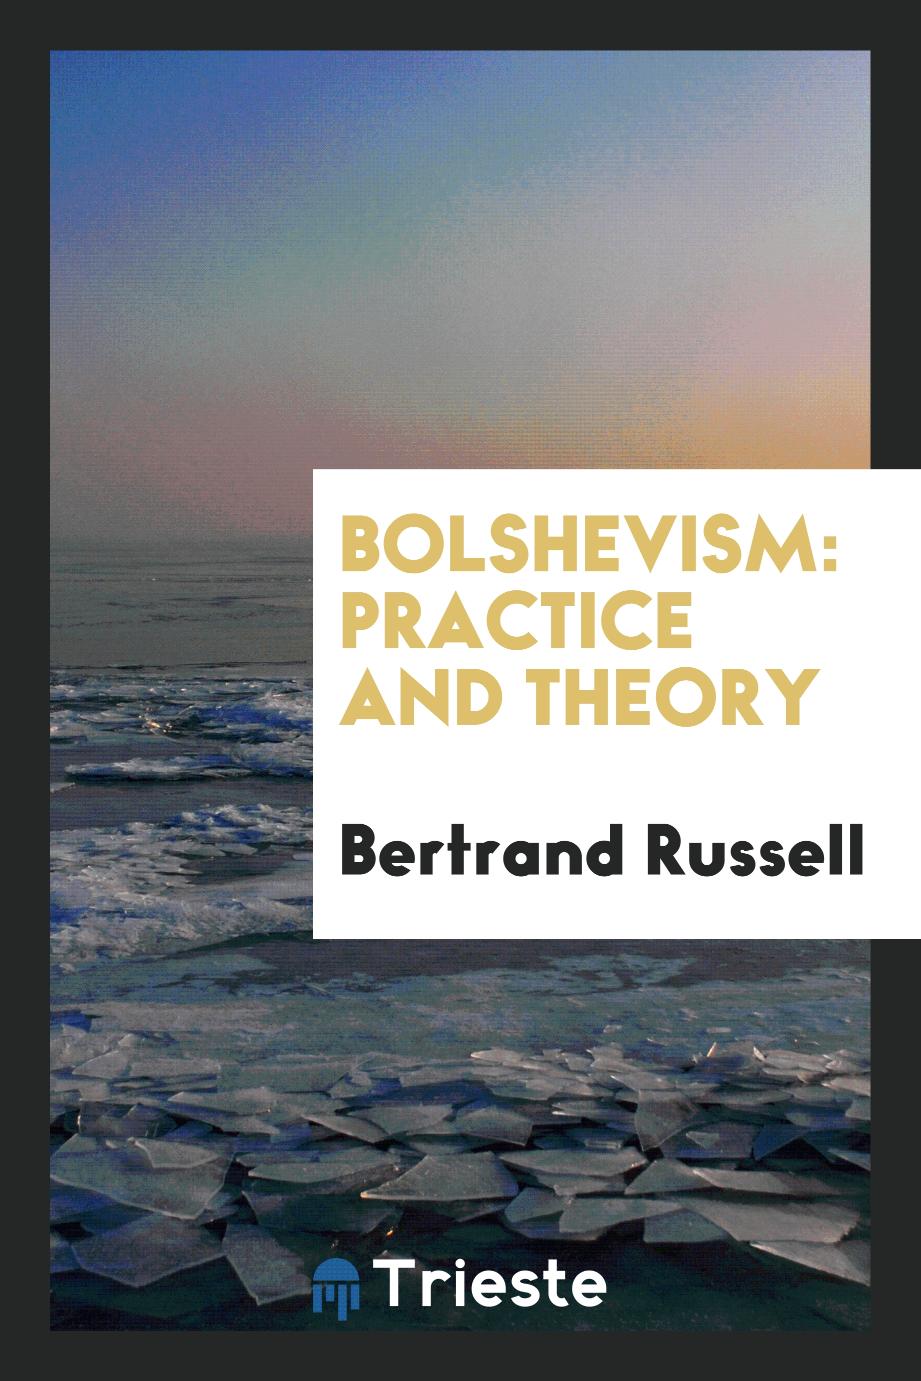 Bolshevism: Practice and Theory